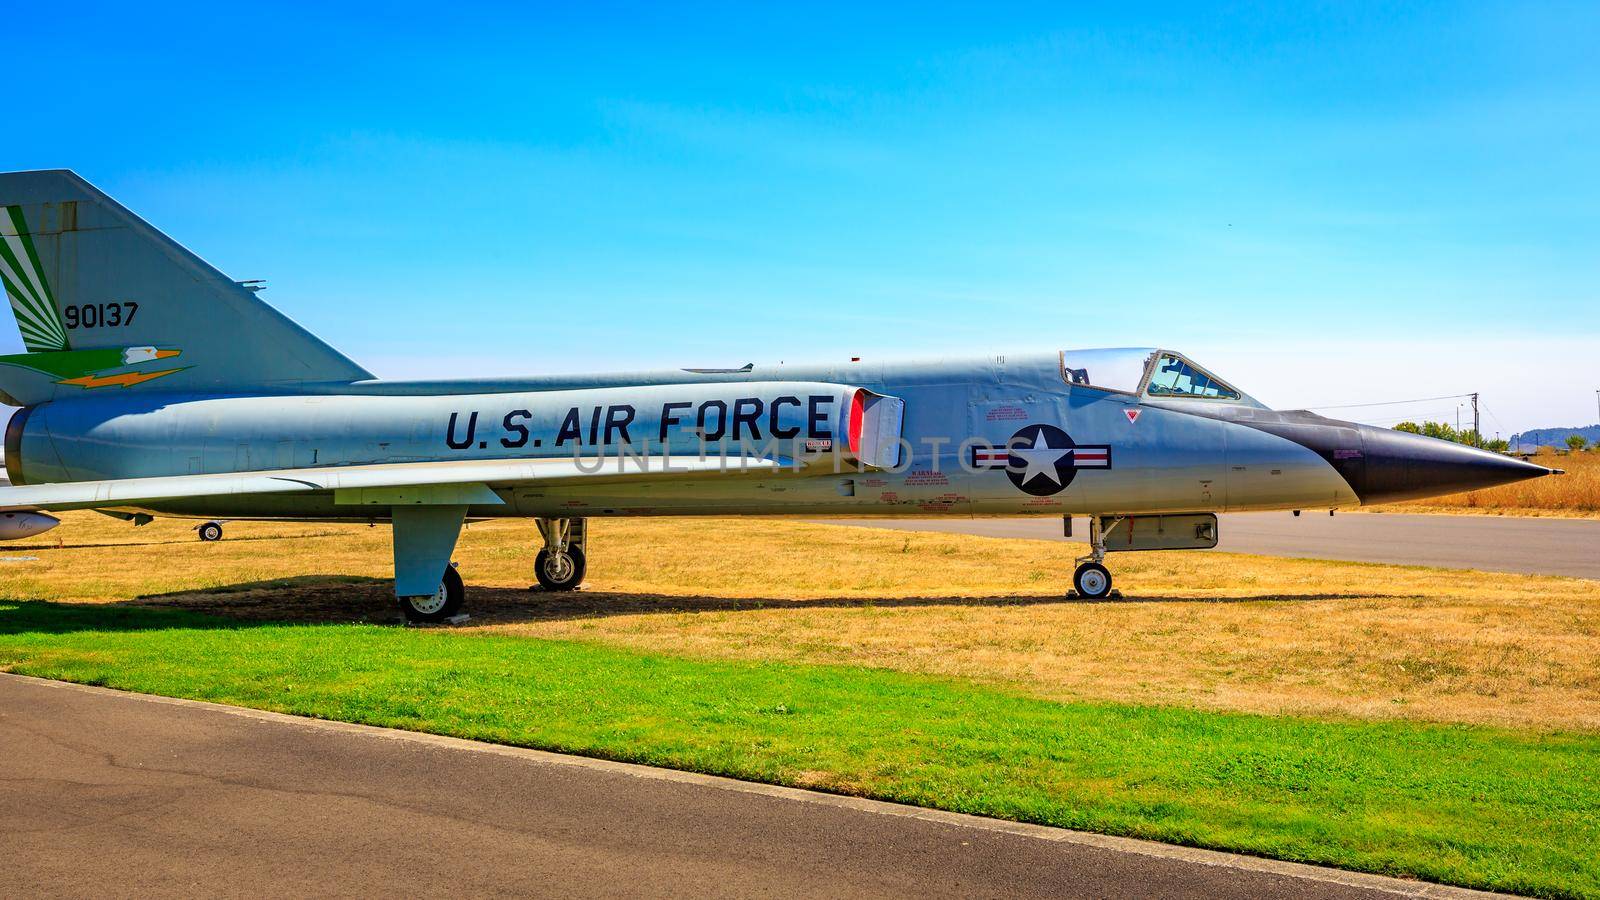 McMinnville, Oregon - August 21, 2017: US Air Force Convair F-106 Delta Dart on exhibition at Evergreen Aviation & Space Museum.